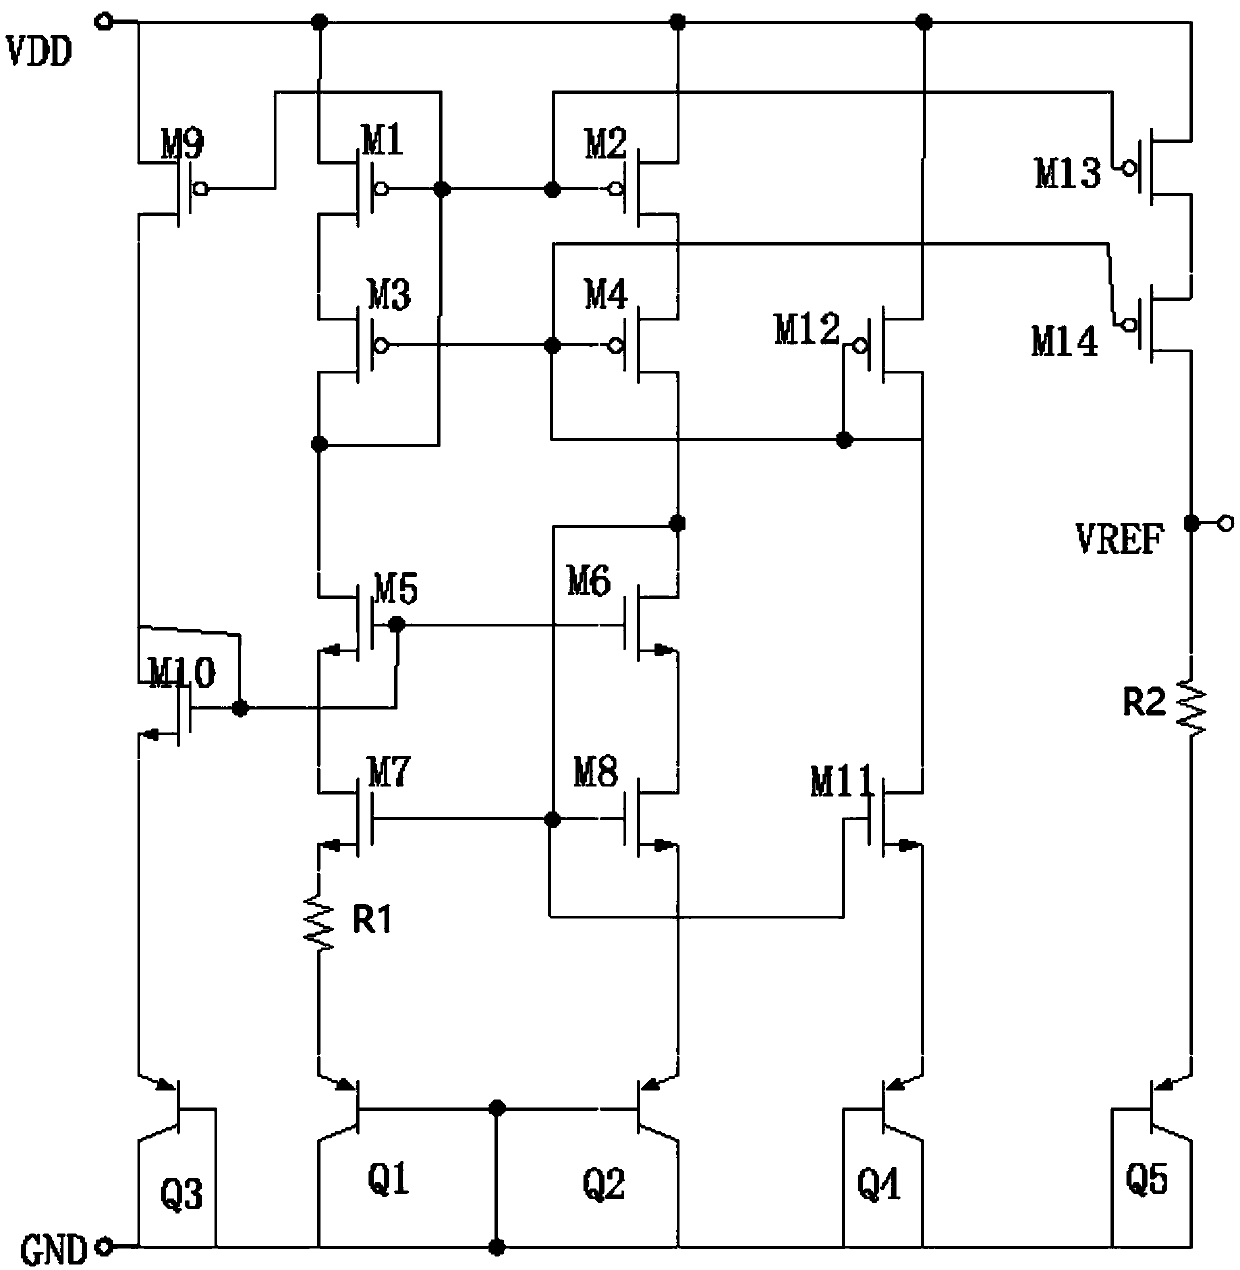 Band-gap reference voltage source capable of improving upper limit of power supply voltage fluctuation